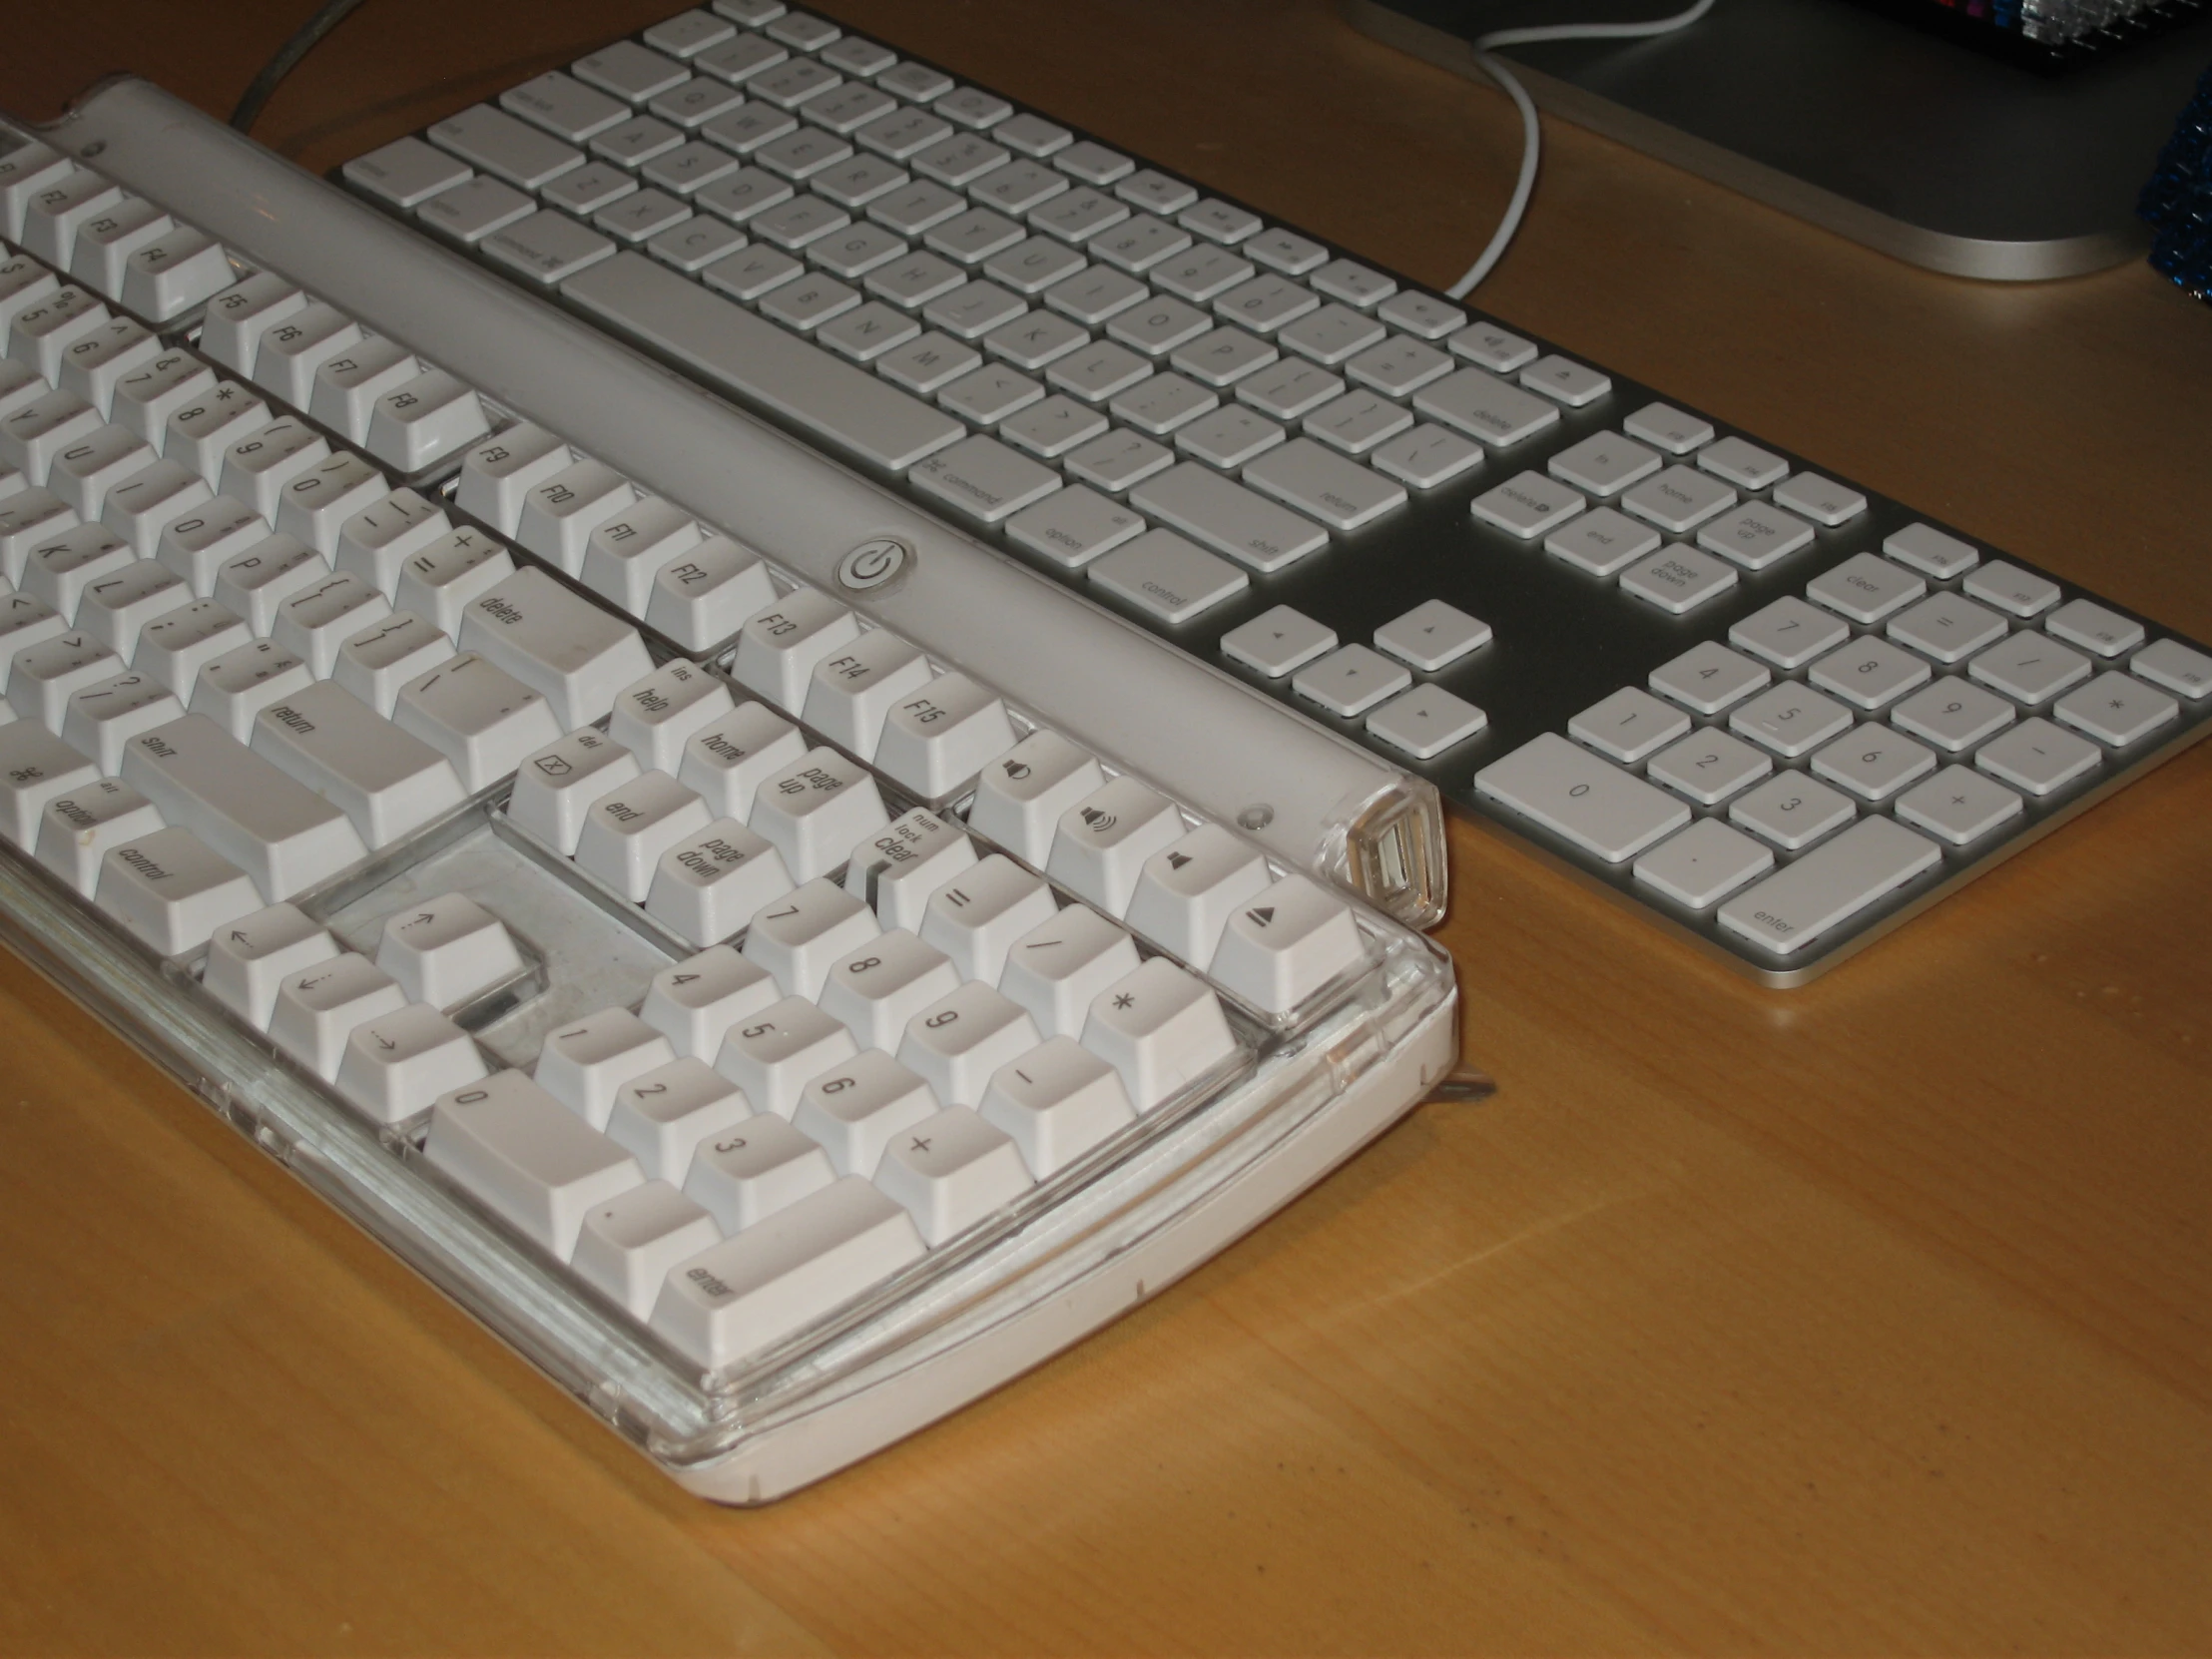 a couple of keyboards that are sitting on a desk